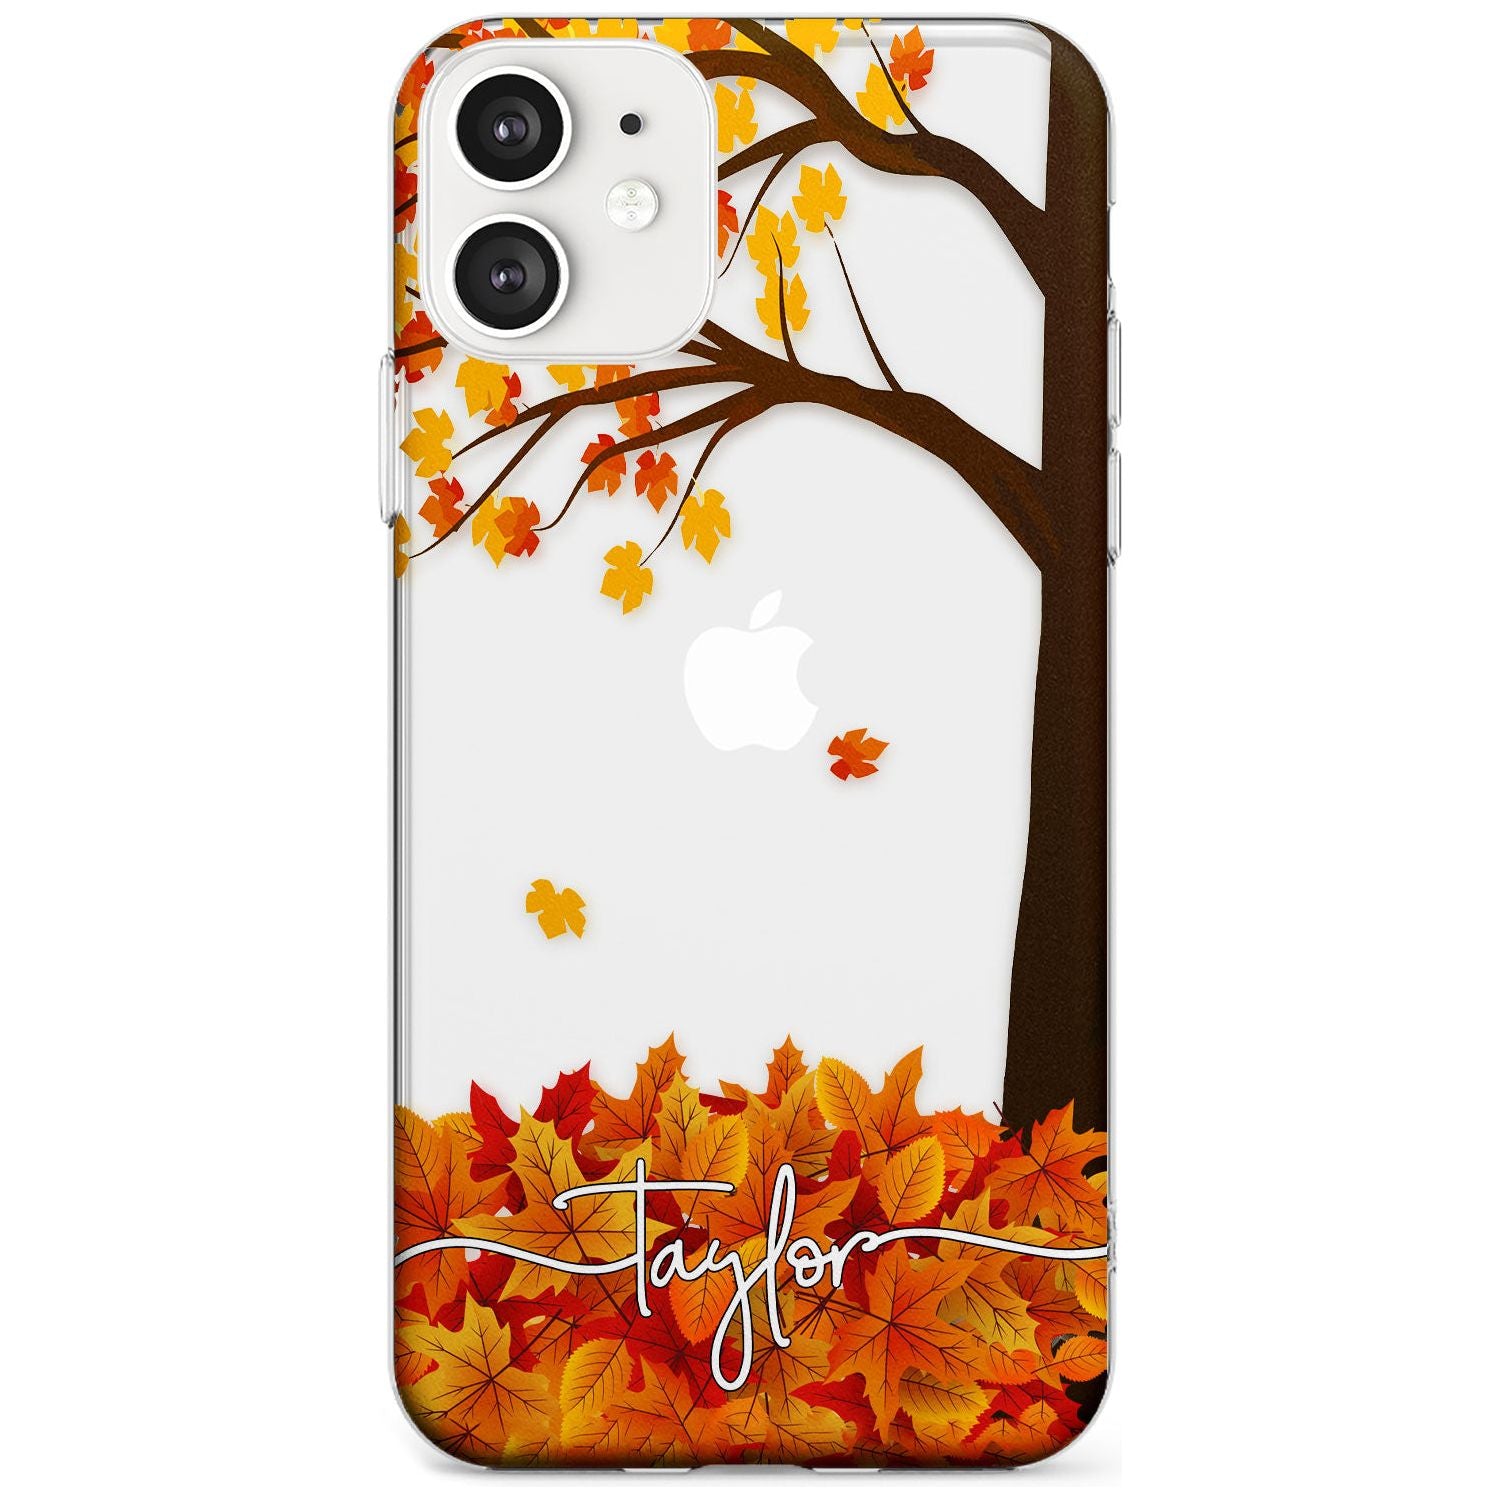 Personalised Autumn Leaves Slim TPU Phone Case for iPhone 11